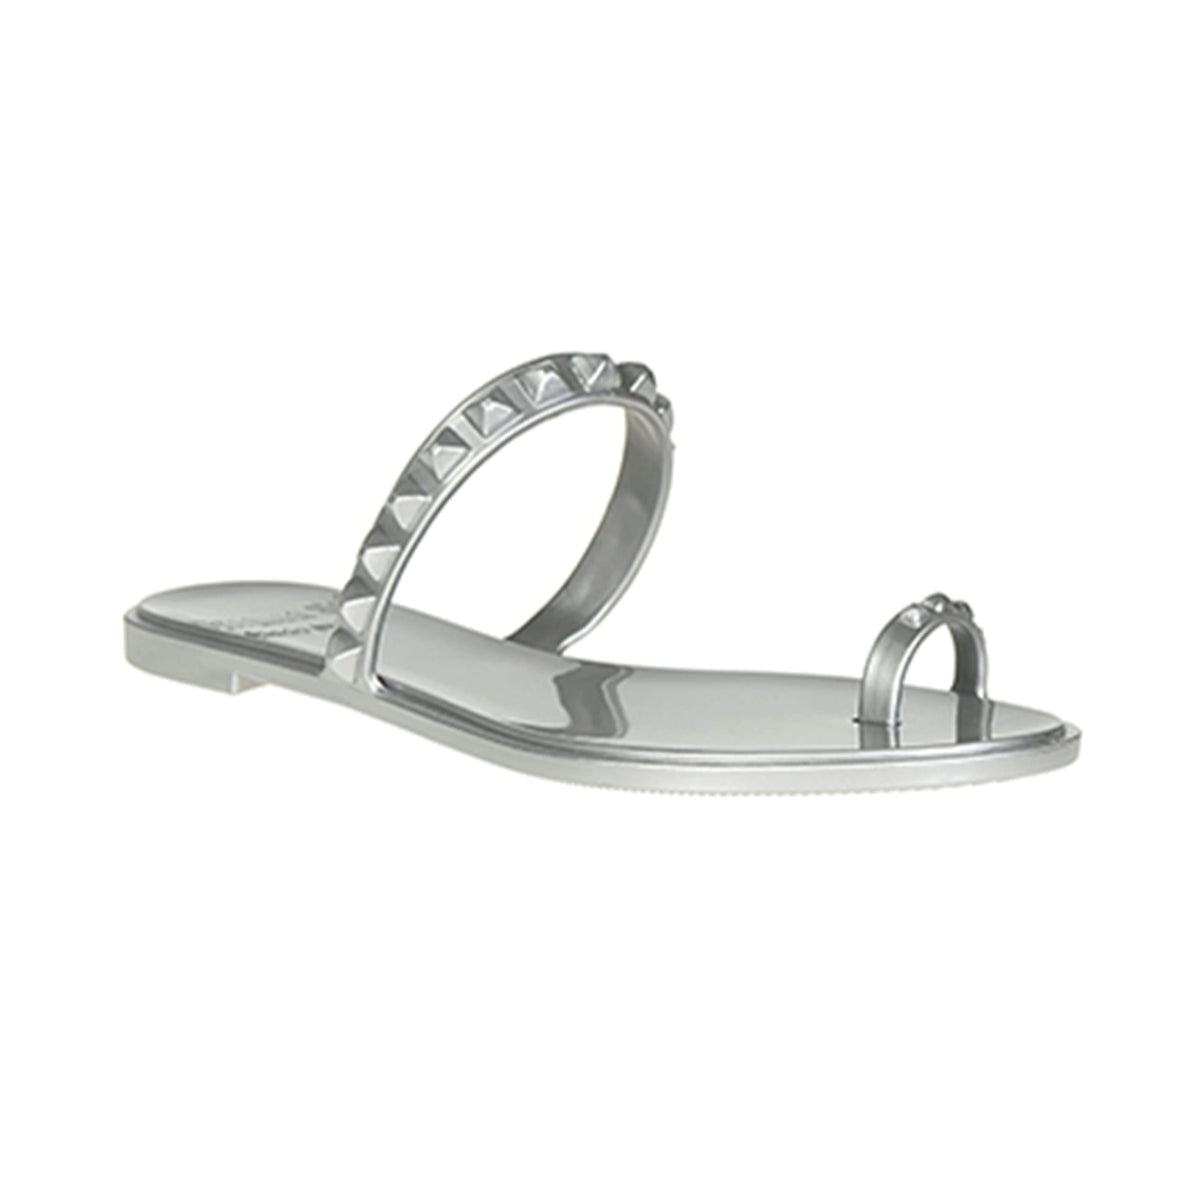 Silver Carmen Sol studded jelly sandals for the pool